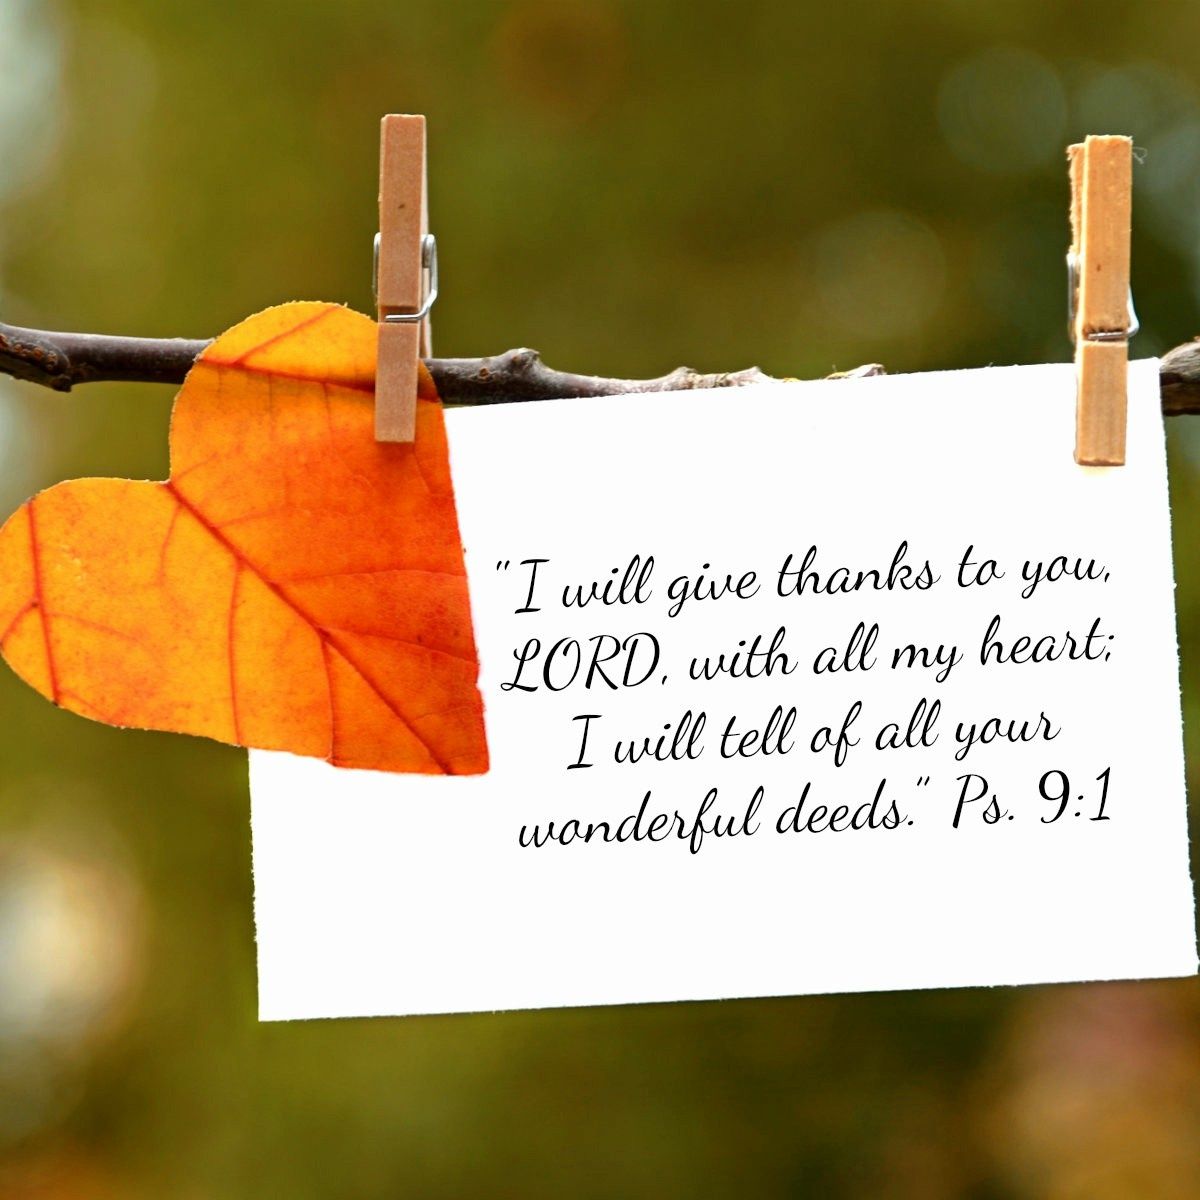 Best Thanksgiving Bible Verses with Image